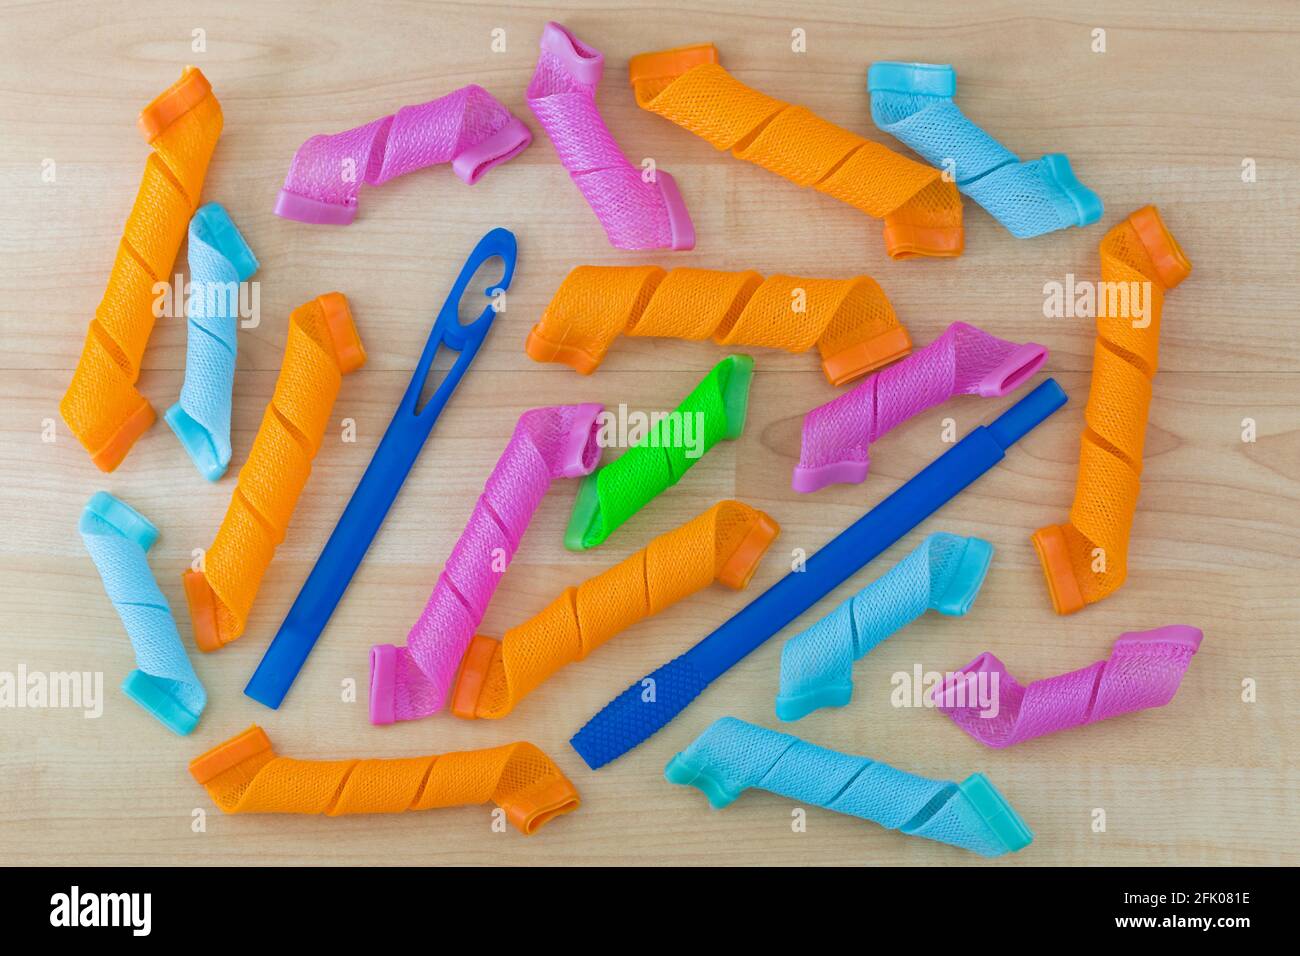 Colorful Hair Curlers, long spiral ringlets, leverage rollers with wand to speedy curl hair on wooden background Stock Photo